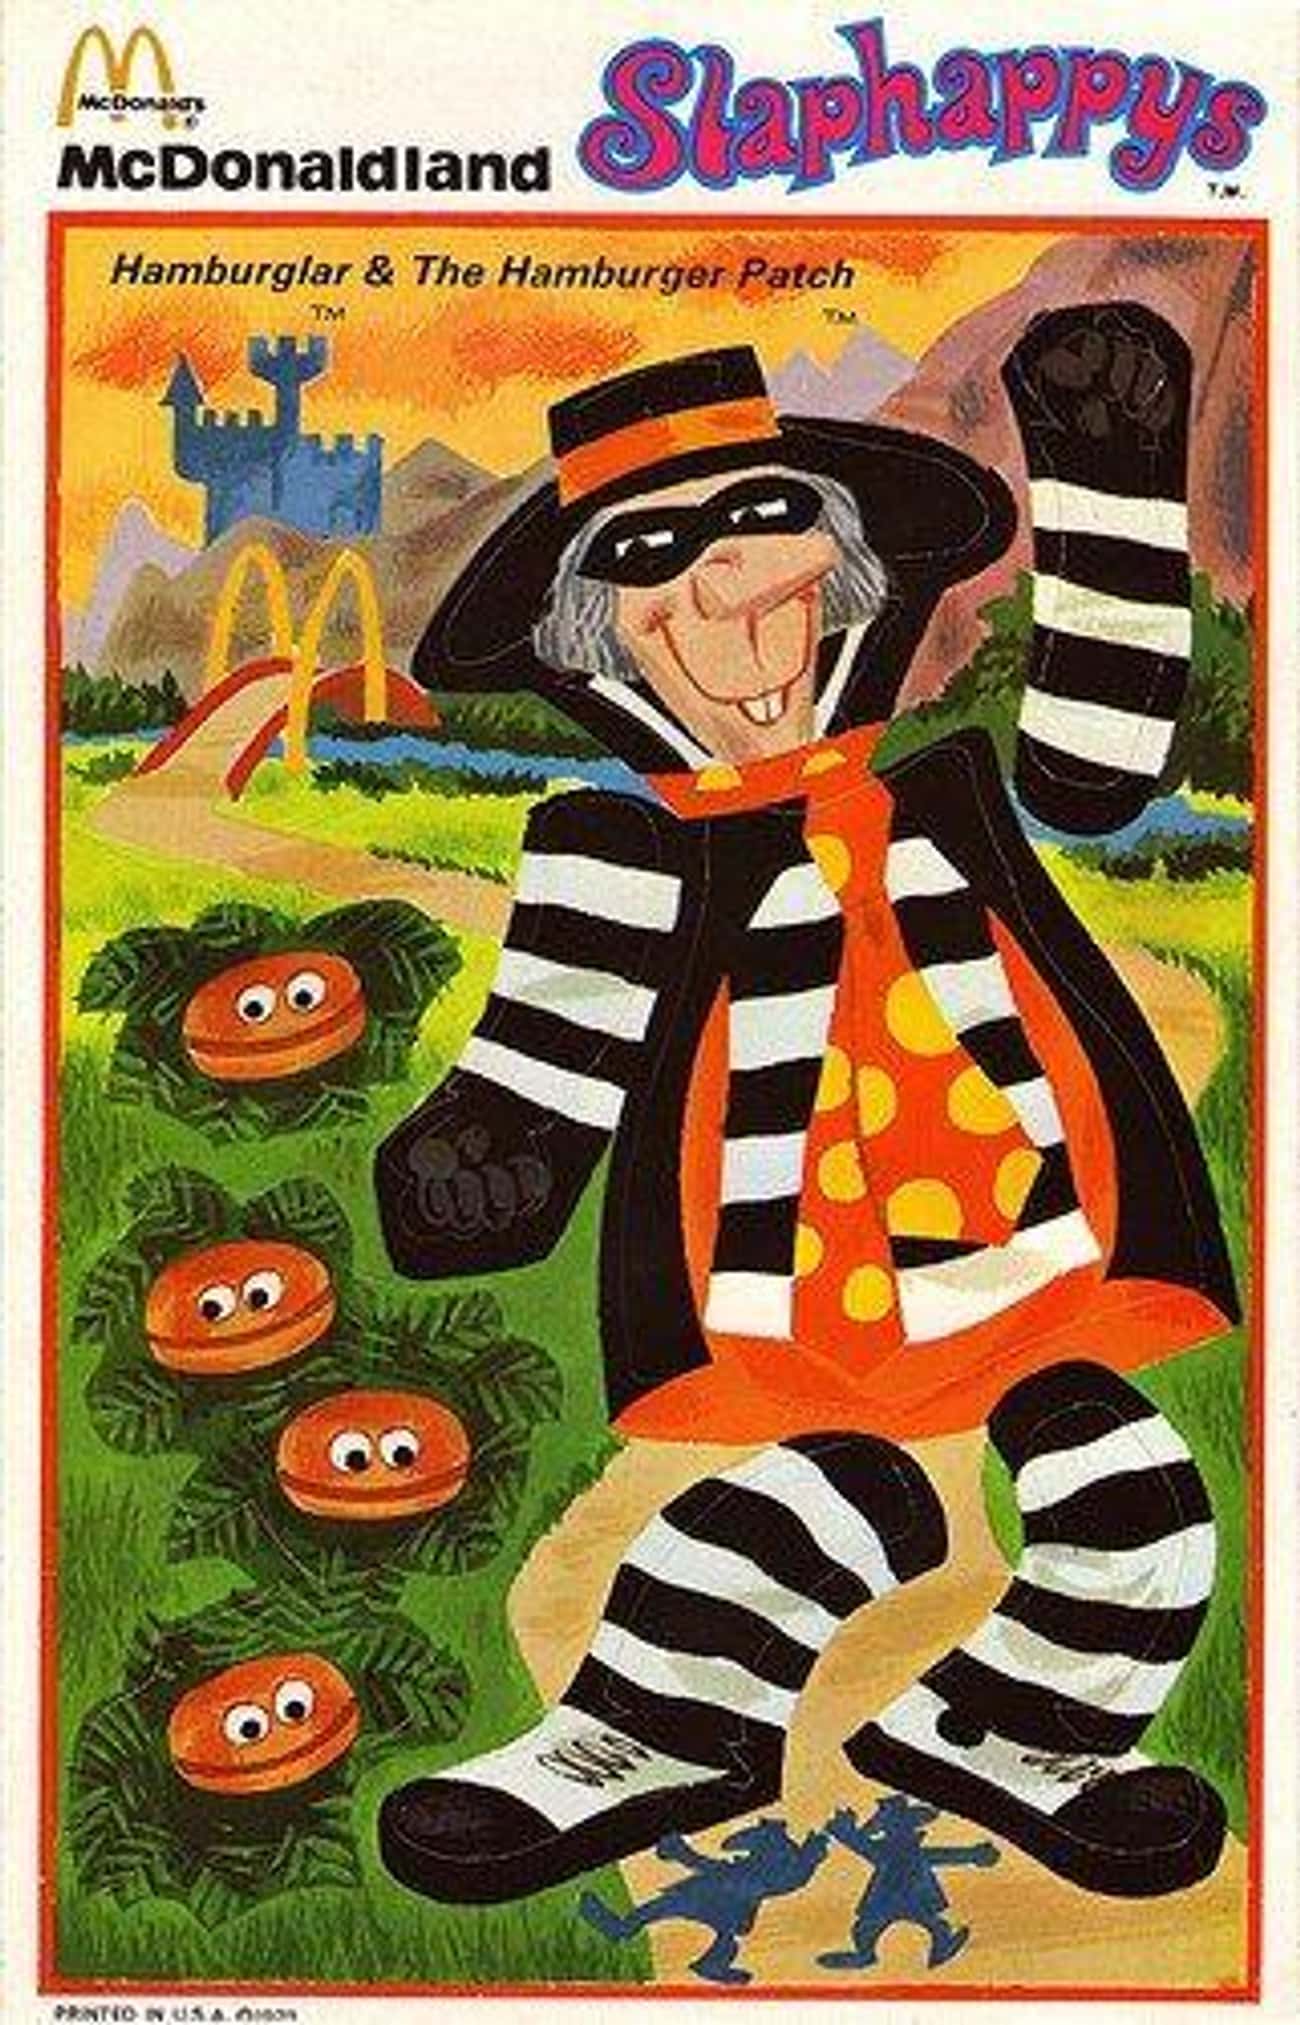 The Hamburglar’s Name Is Hamilton B. Urglar, And He Also Goes By ‘The Lone Jogger’